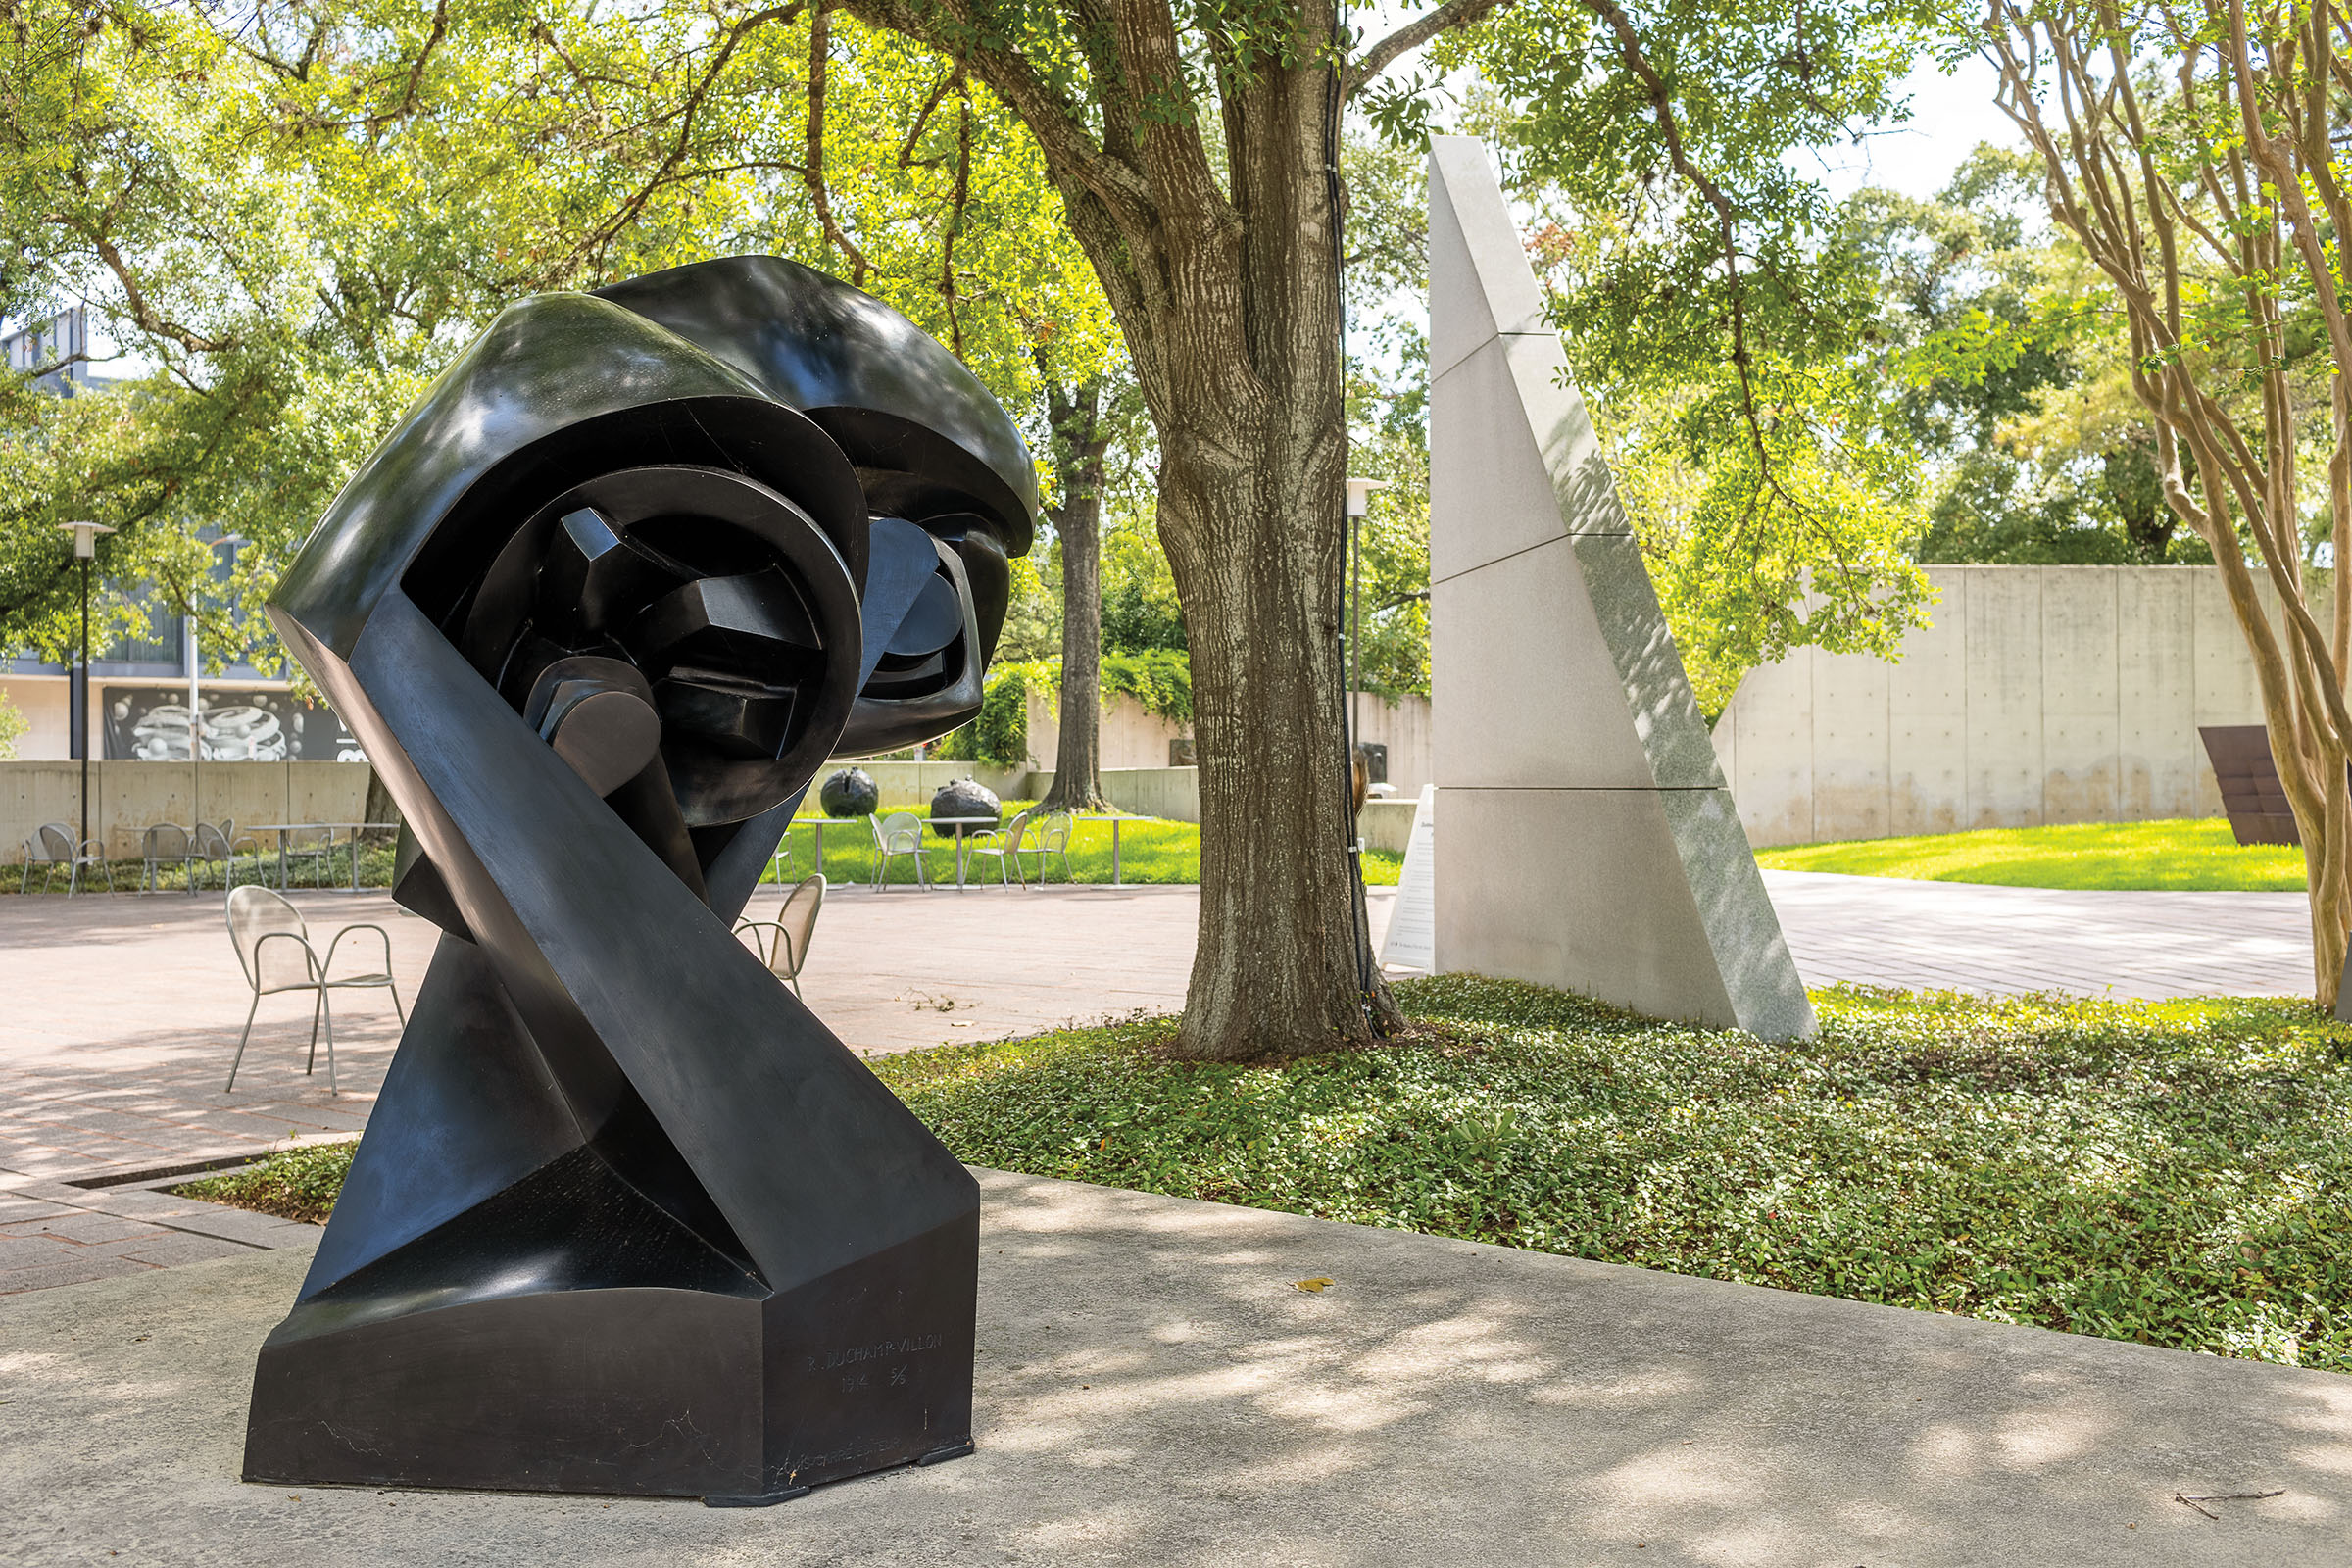 An abstract sculpture made of black material on a concrete slab surrounded by green trees